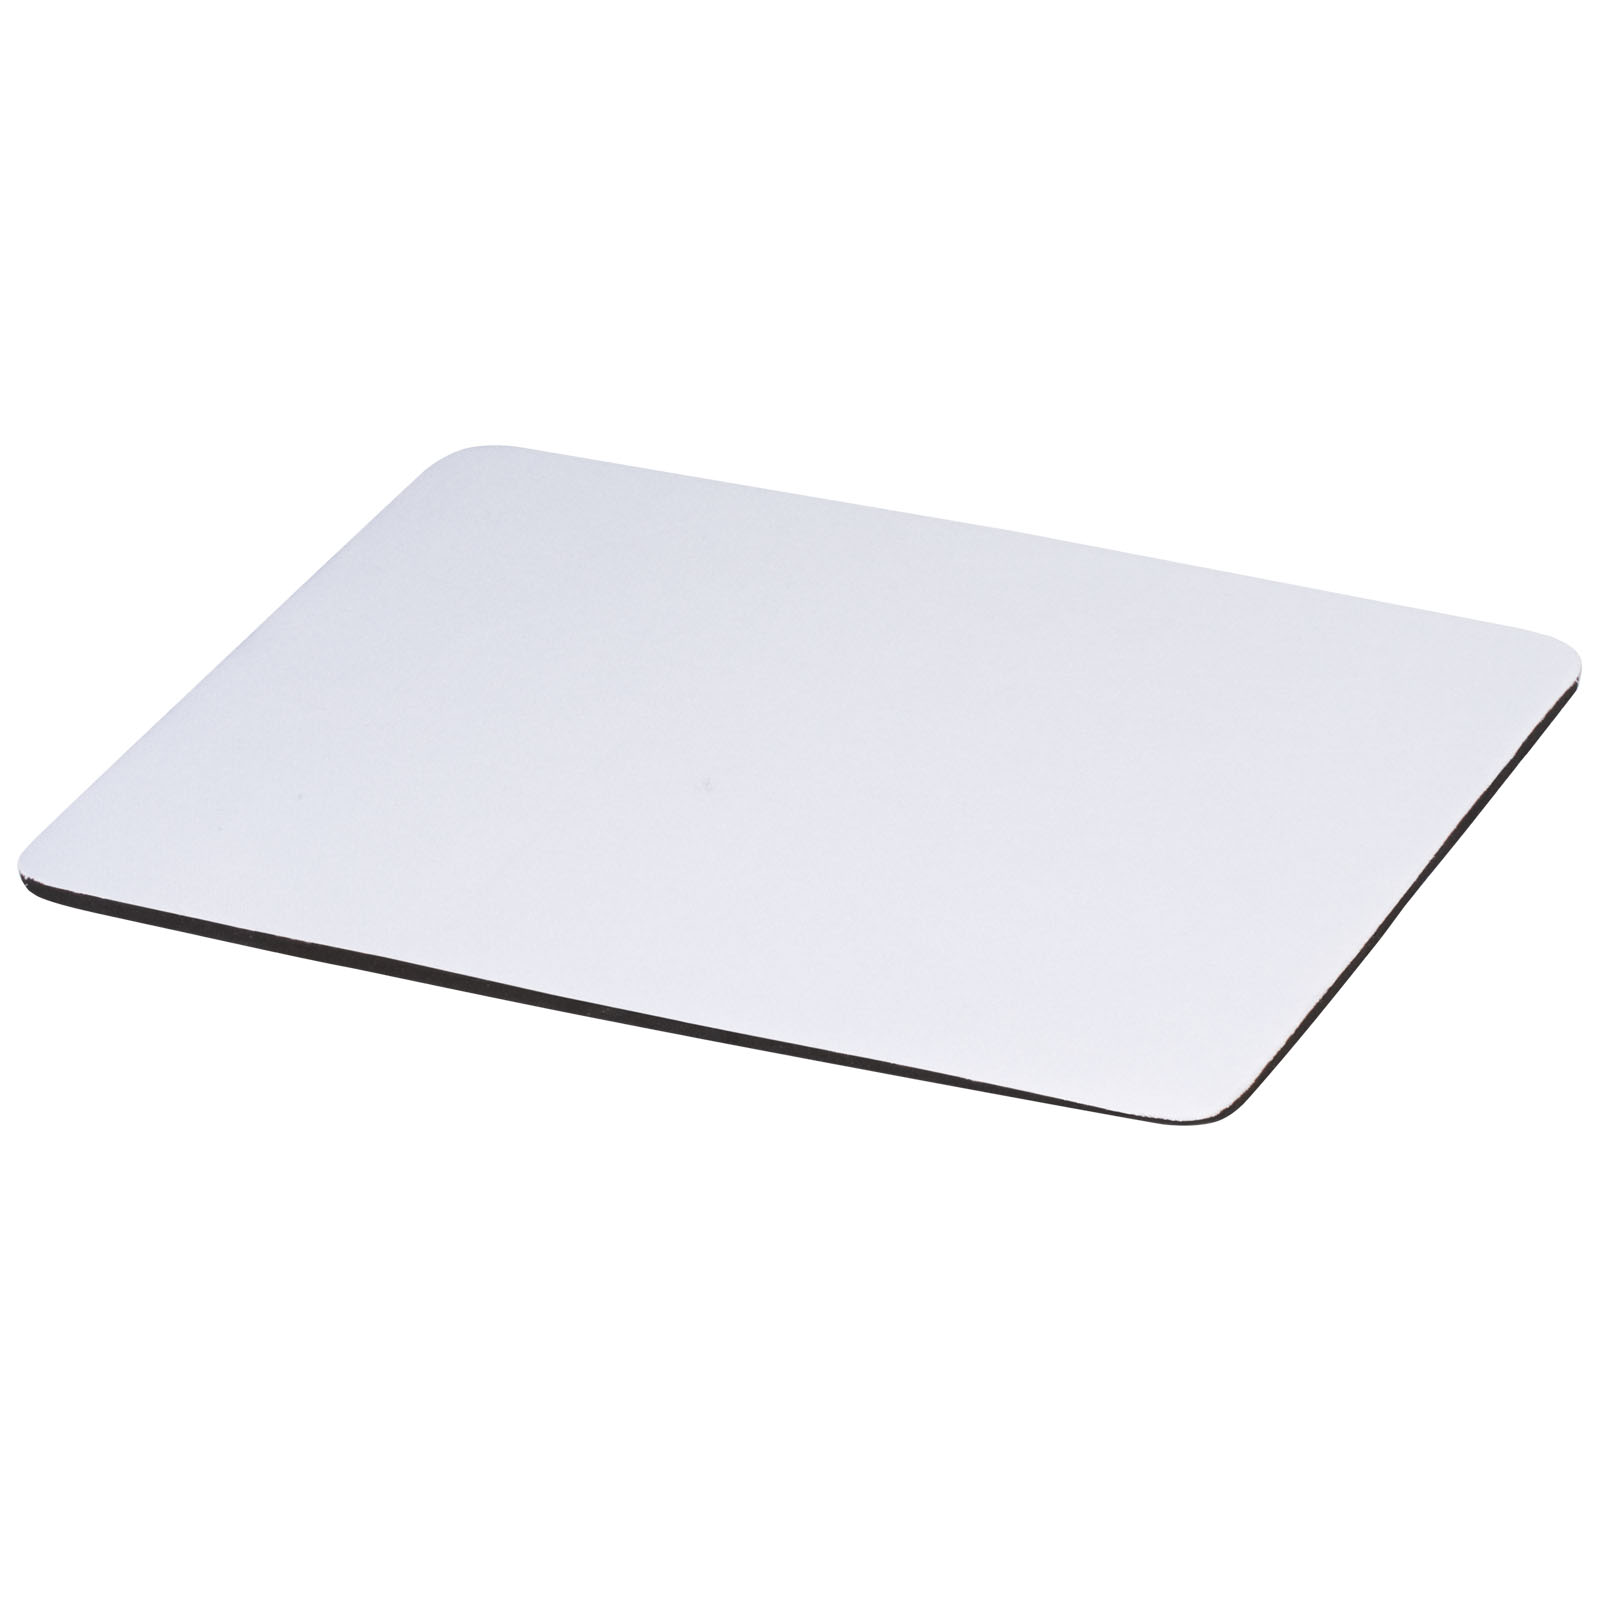 Advertising Computer Accessories - Pure mouse pad with antibacterial additive - 0